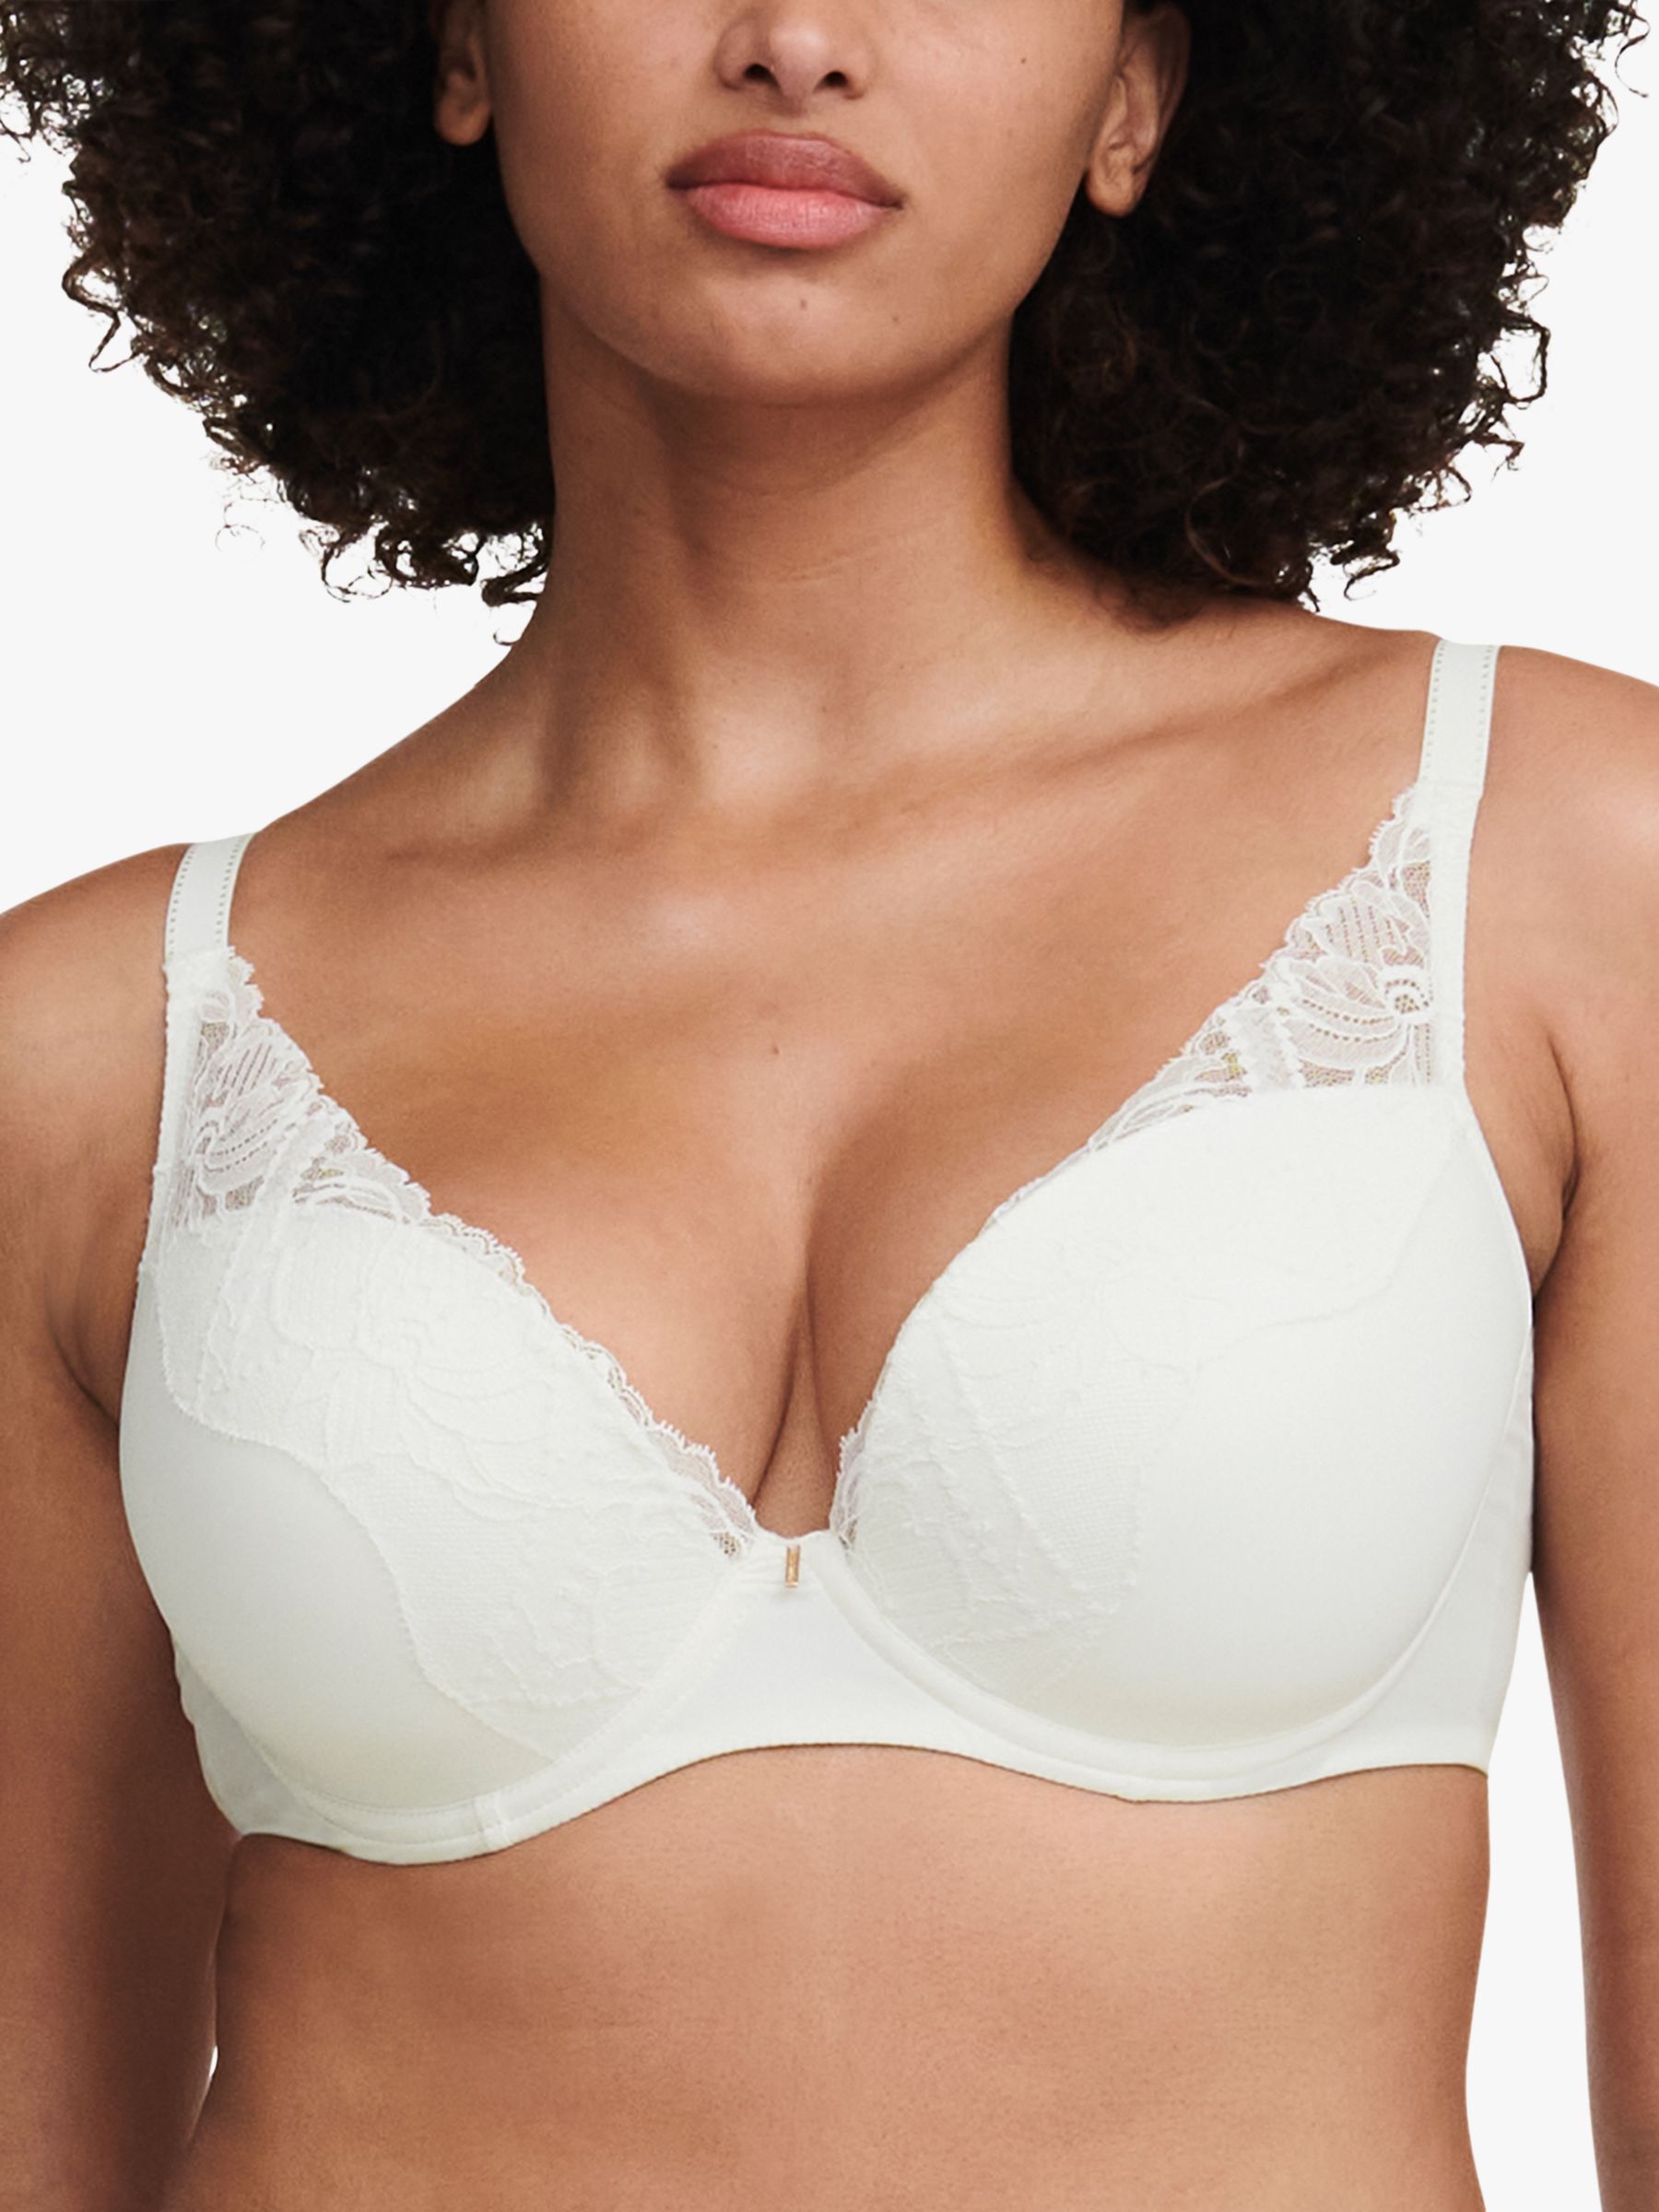 Ann Summers The Icon Padded Plunge Lace Bra - Black - Plunge Bra for Women  with Underwire Cups & Lace Detail - Underwired Bra - Ladies Bras - Women's  Everyday Bras 